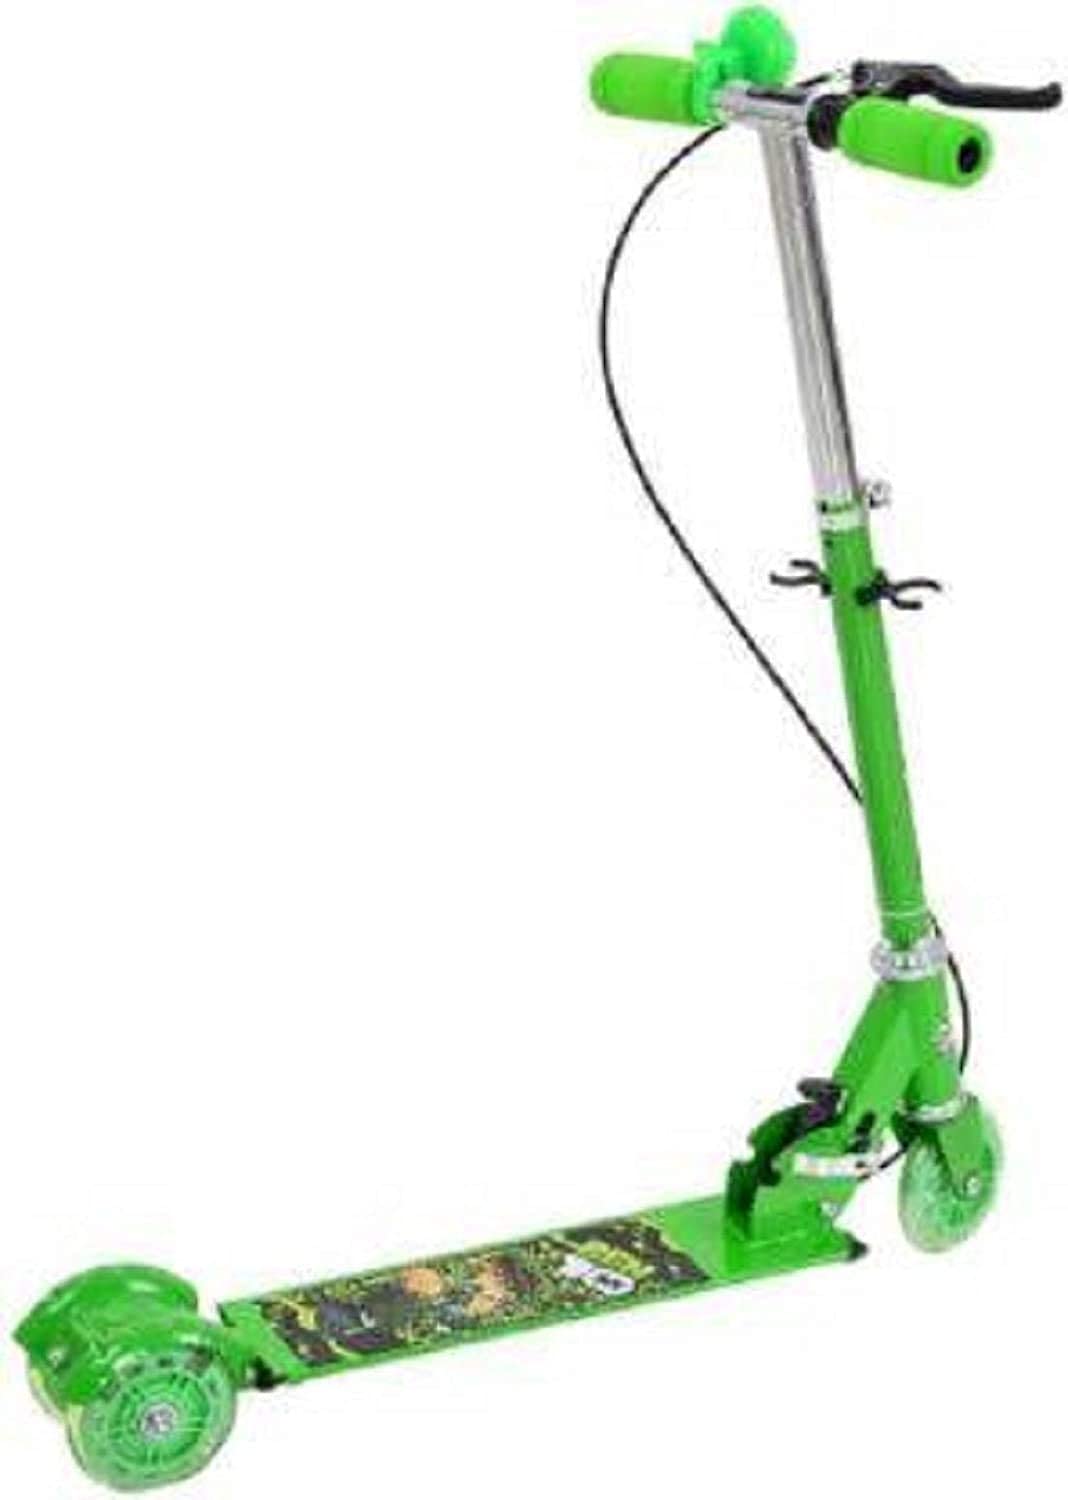 Prokick 3 Wheeler Scooter for Kids of 3 to 14 Years Age, Adjustable Height, Foldable, Green - Best Price online Prokicksports.com